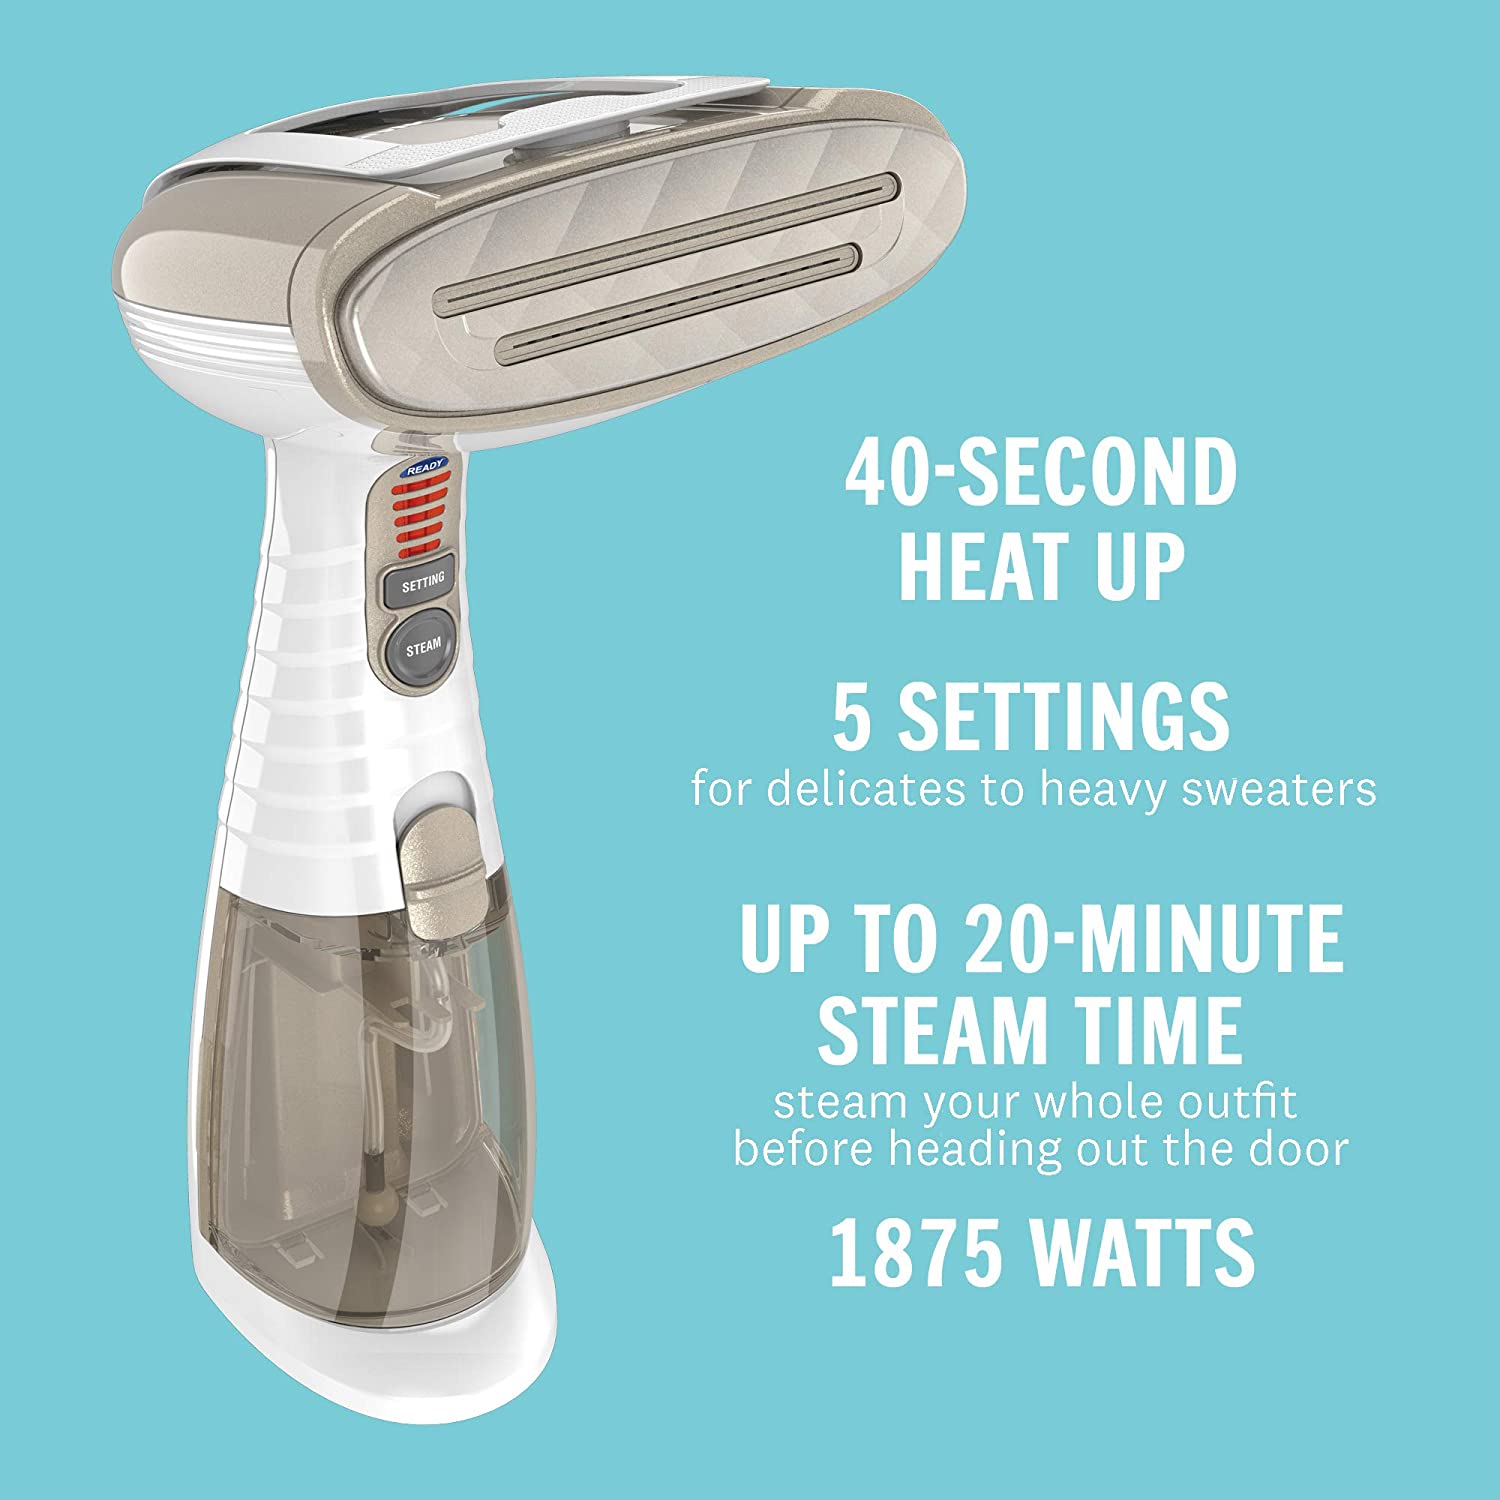 Conair Turbo Extreme Steam Hand Held Fabric Steamer, White/Champagne GS59 - image 4 of 12